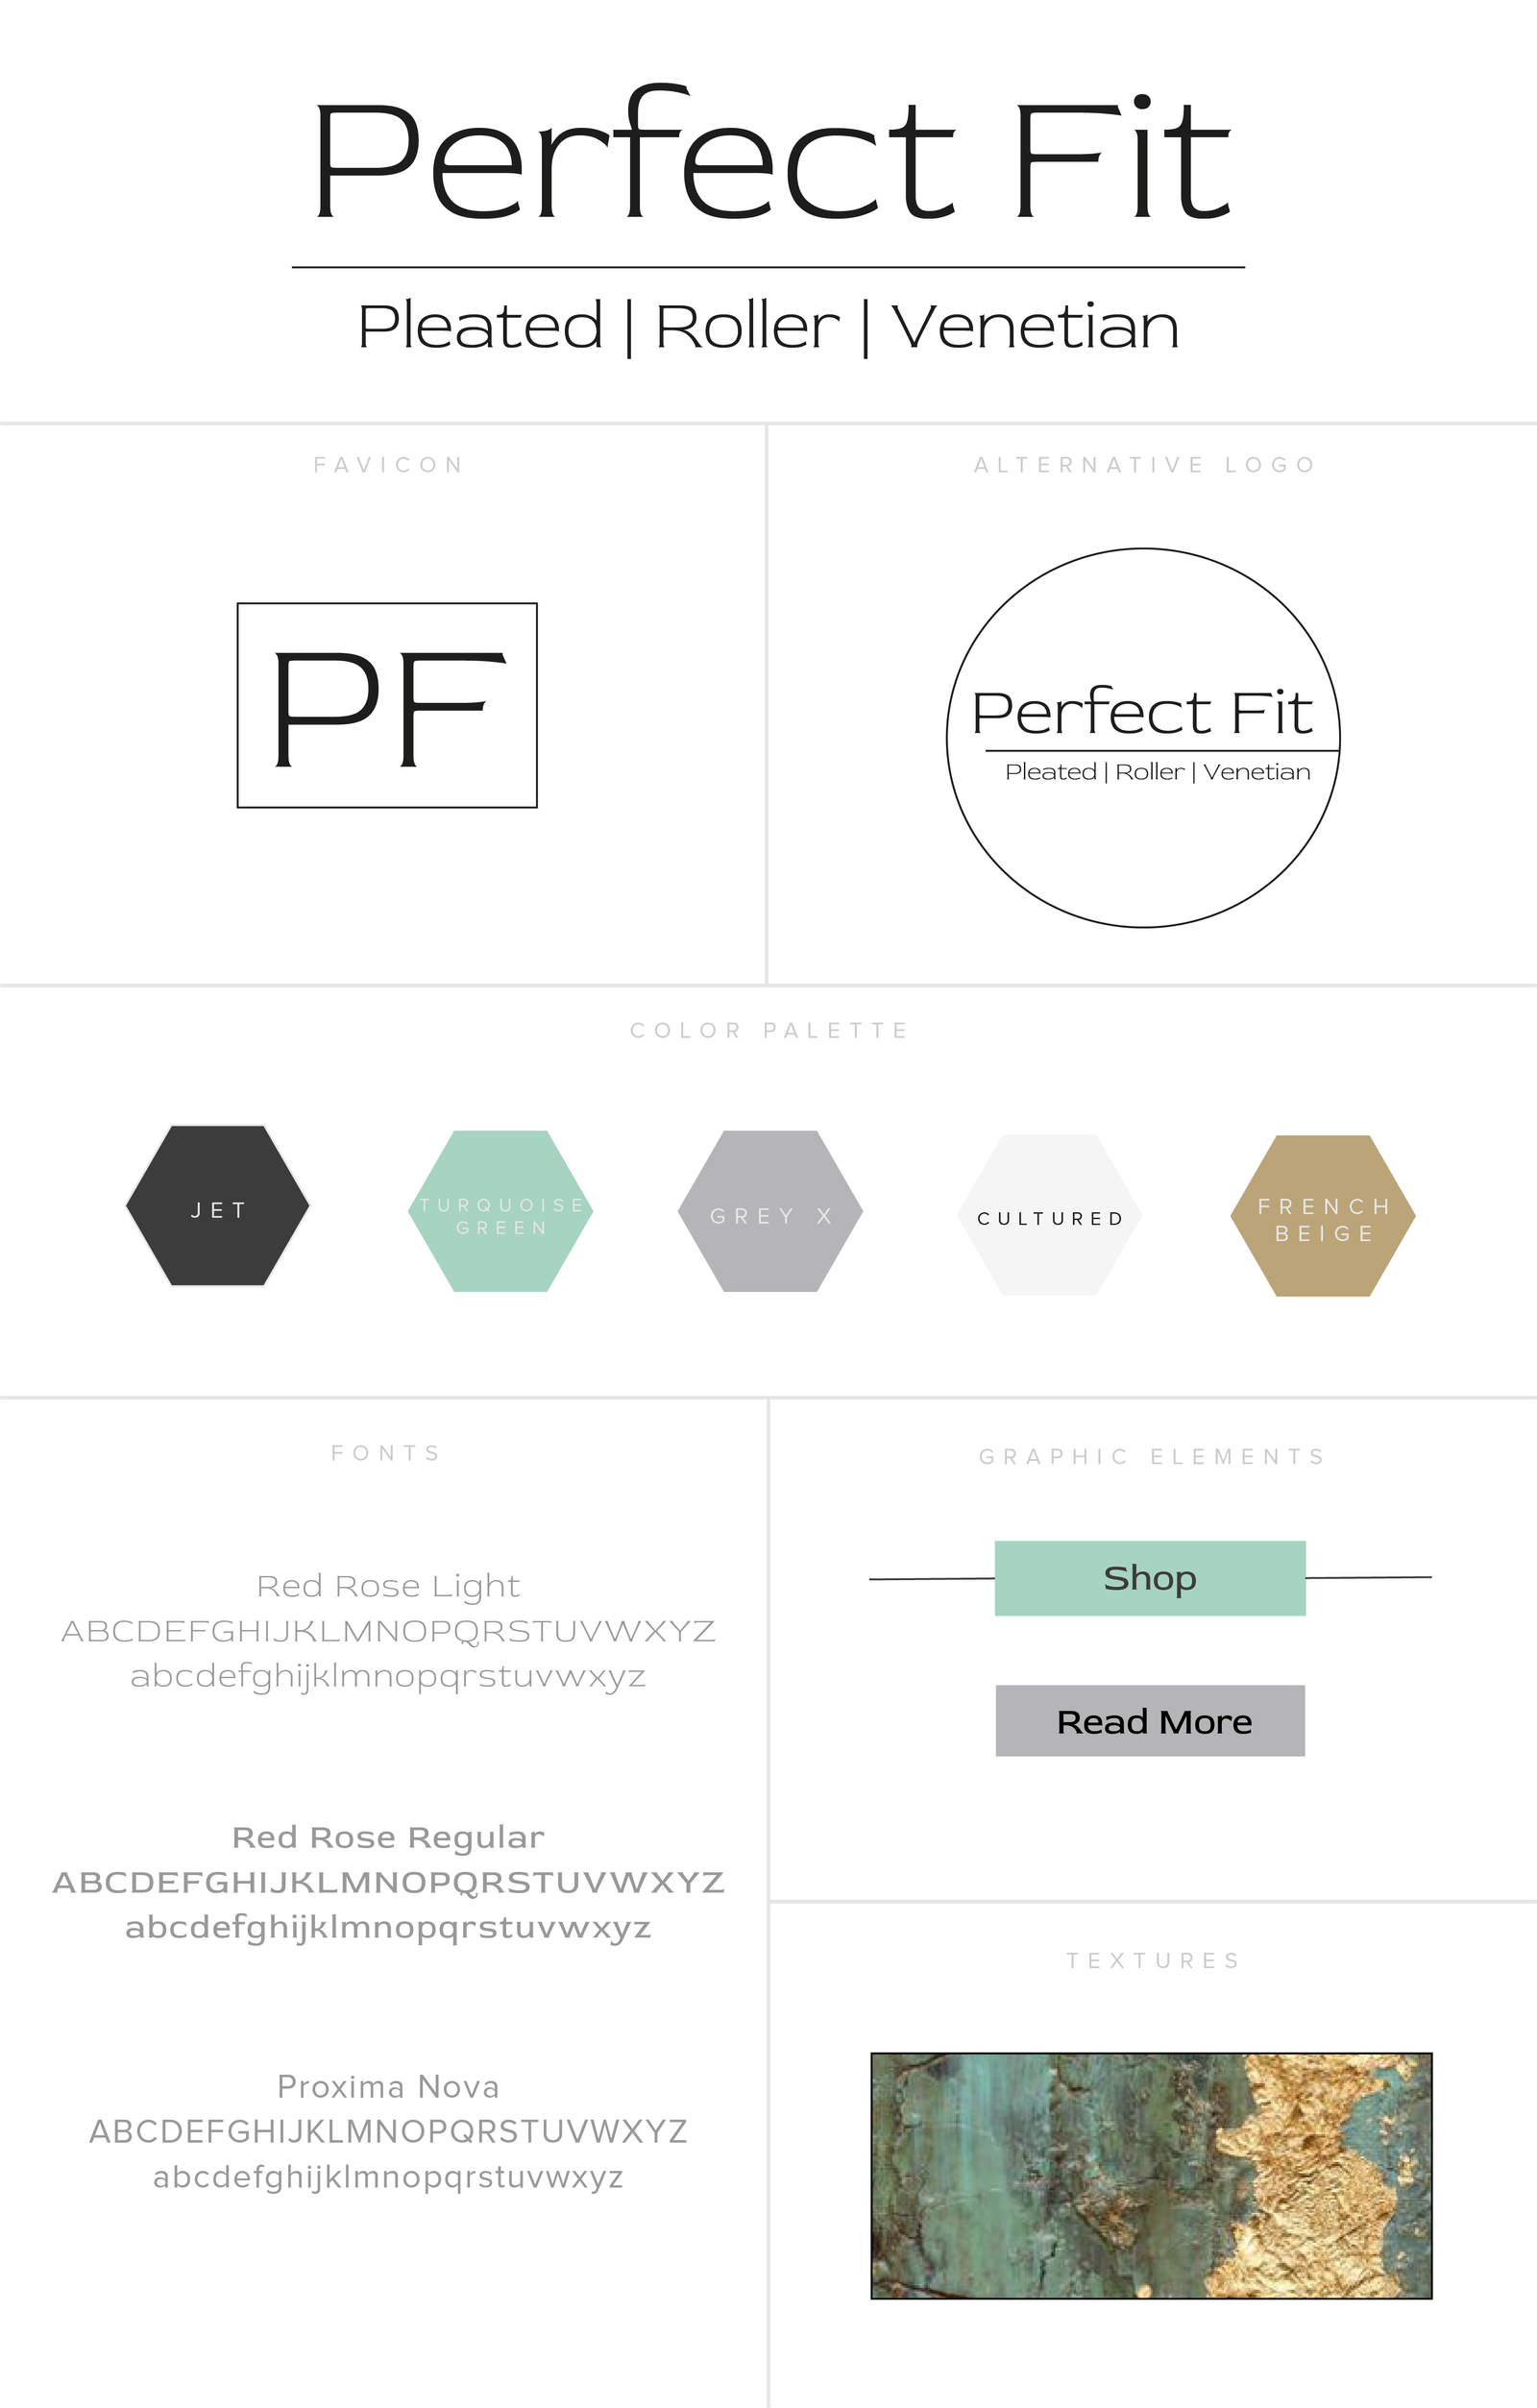 perfect fit branding style board